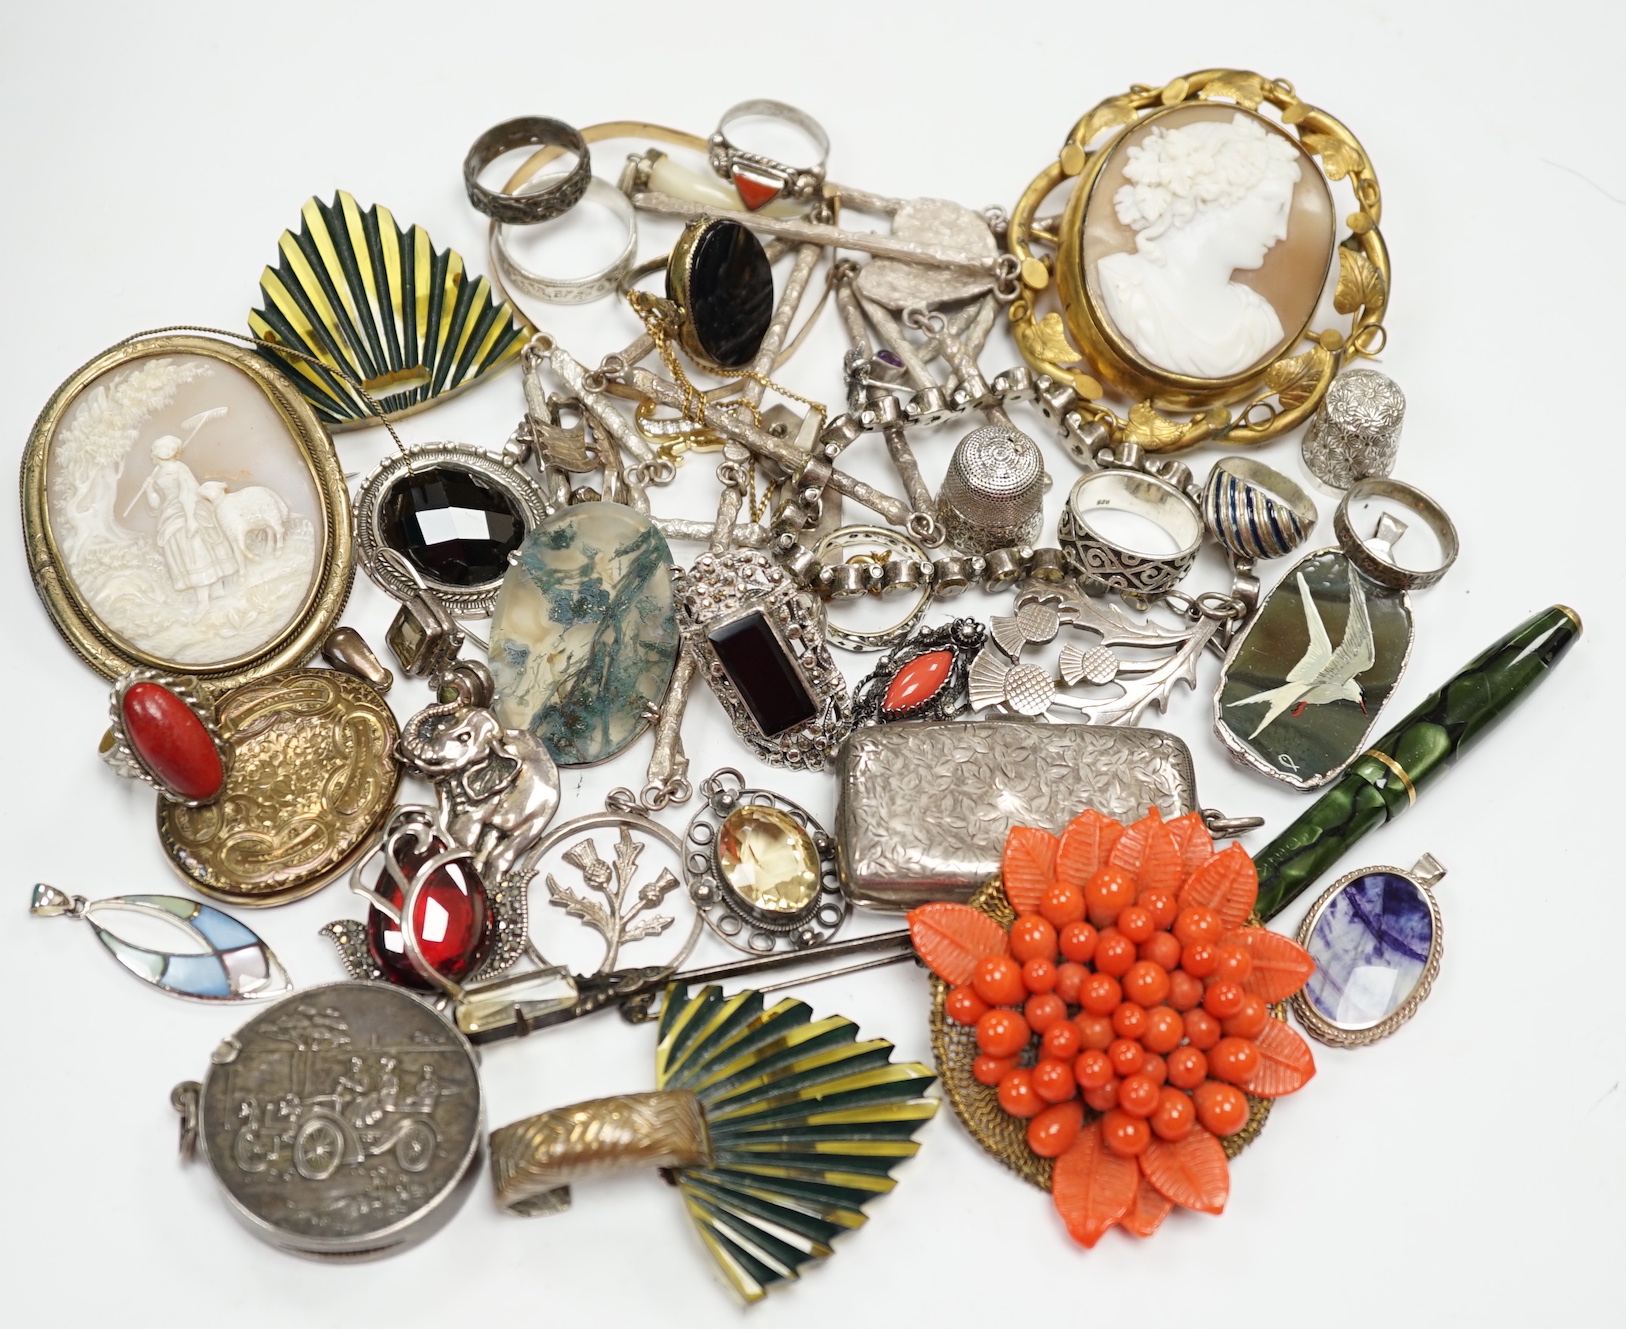 A quantity of assorted mixed silver, jewellery and other items including a sterling and enamel drop pendant, coral, silver brooches, Norwegian sterling and enamel flower brooch, fountain pen, pencils, cufflinks, silver s